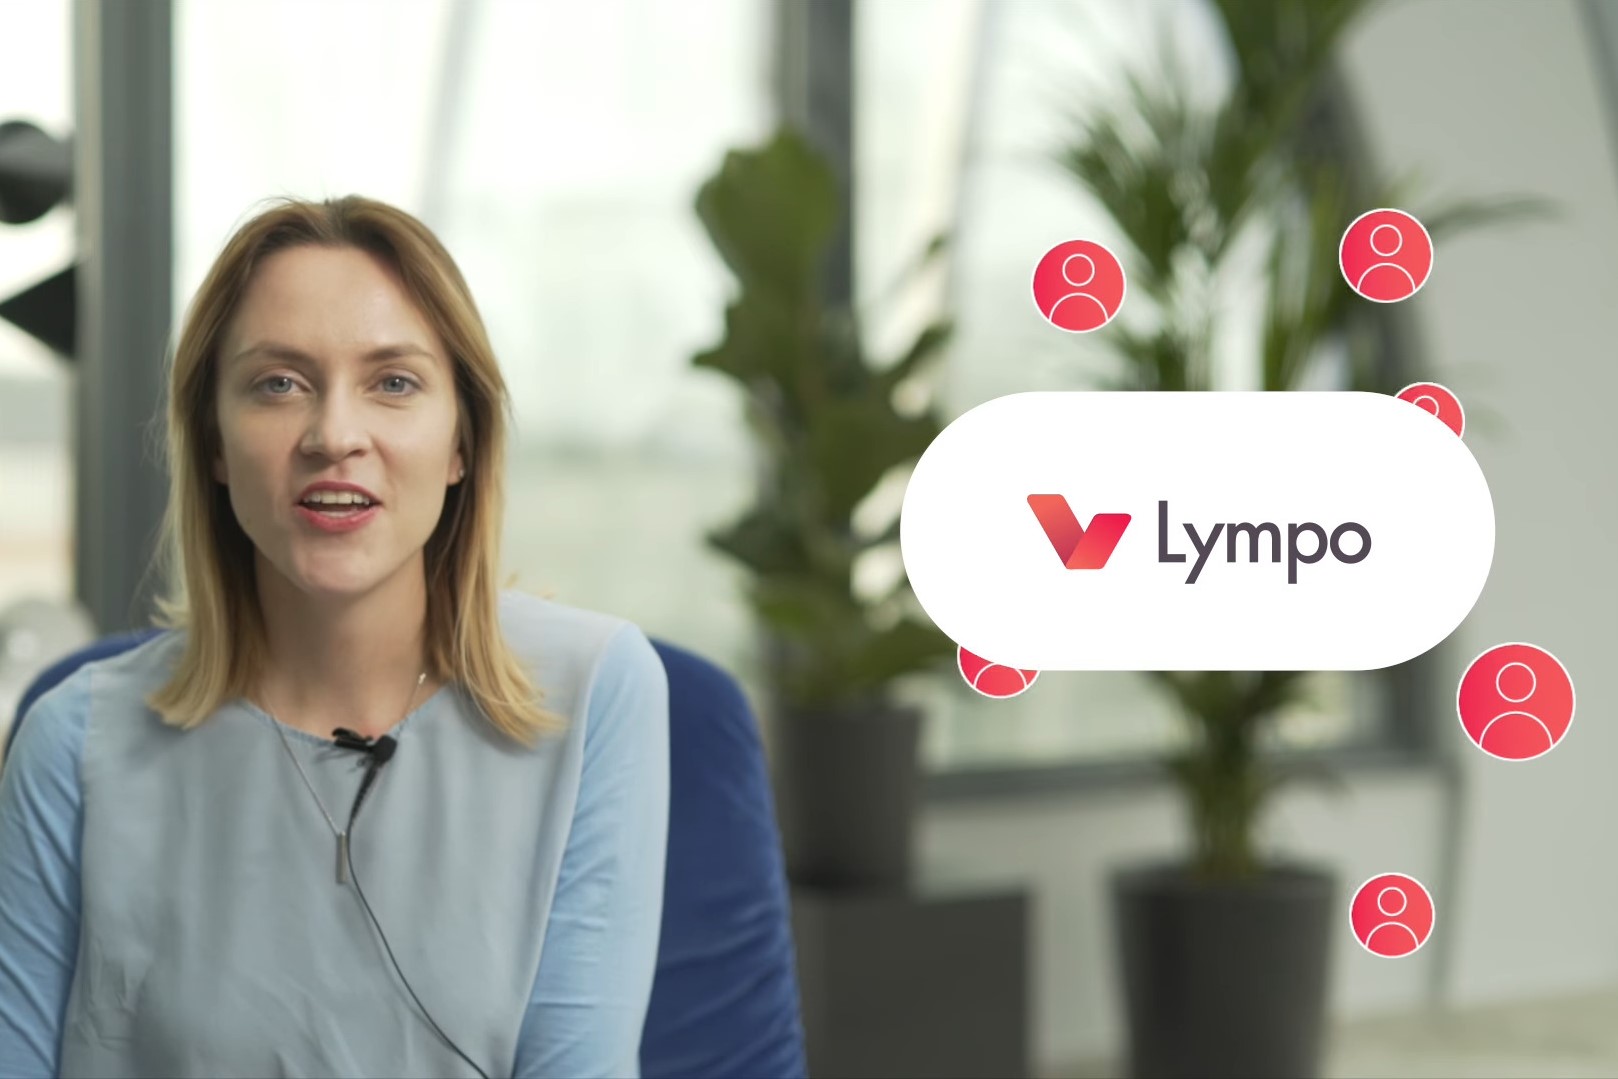 NEO Eco Fund Invests In Lympo